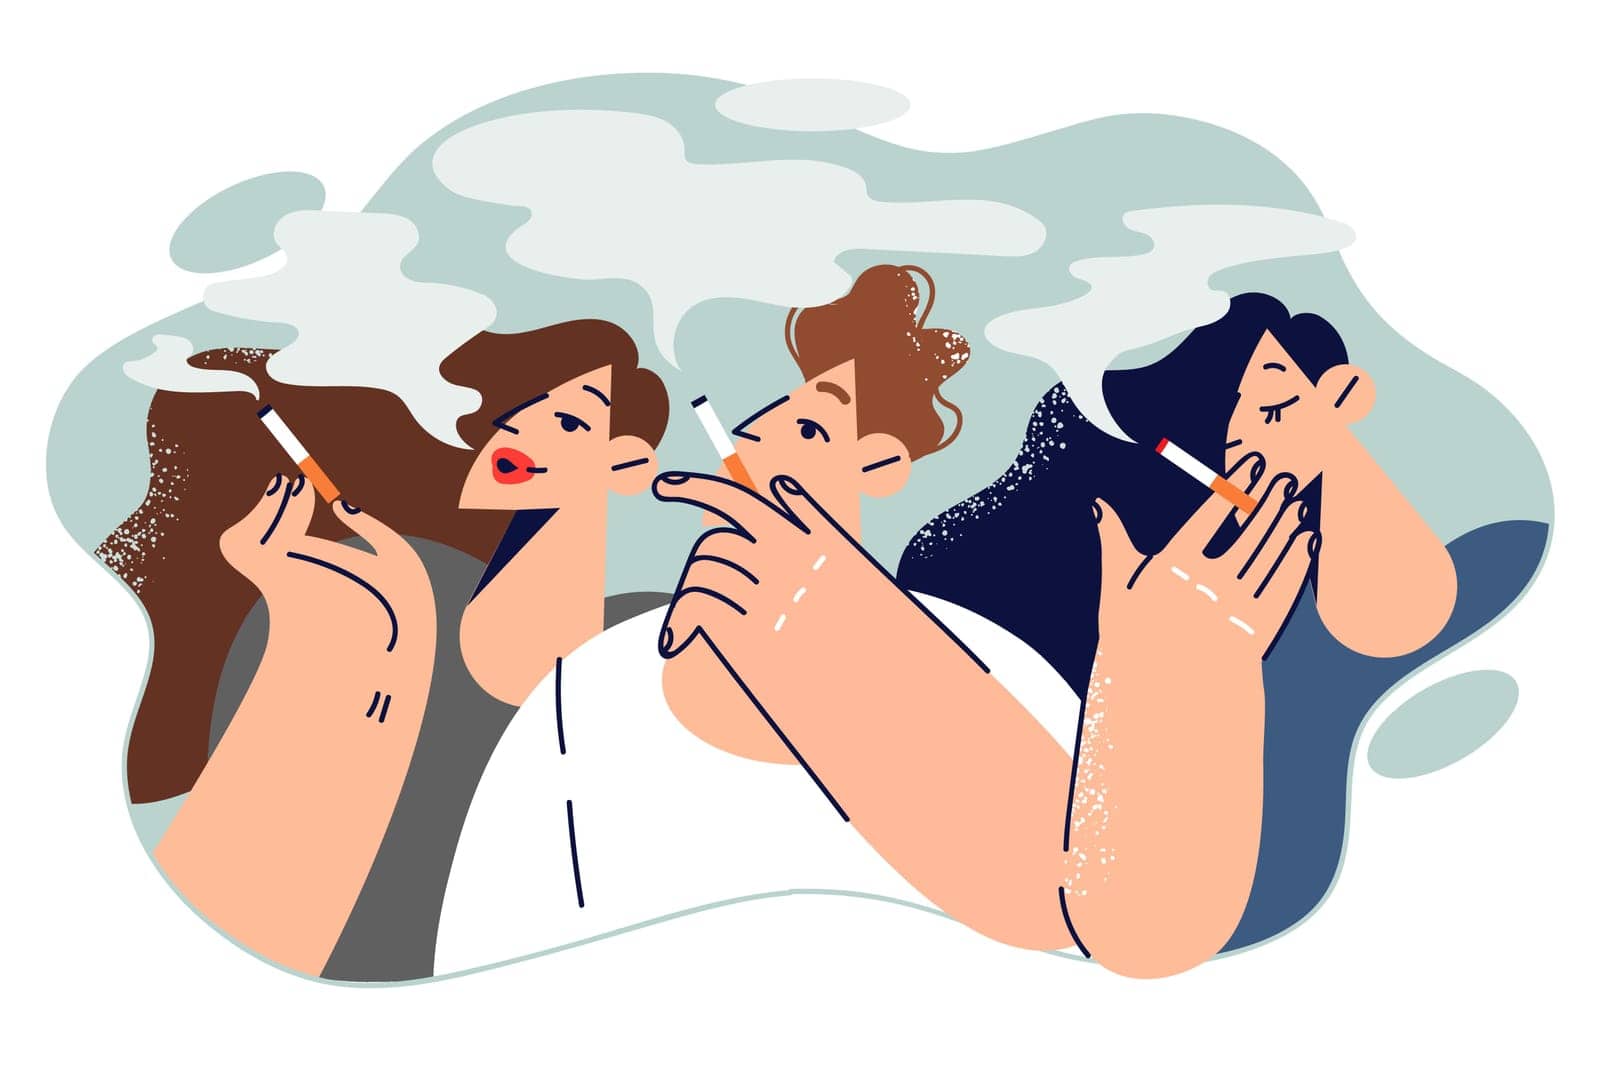 People smoke cigarettes and exhale toxic fumes, risking lung cancer or making passersby passive smokers. Man and two girls smoke, exposing body to harmful effects of combustion of nicotine or tobacco